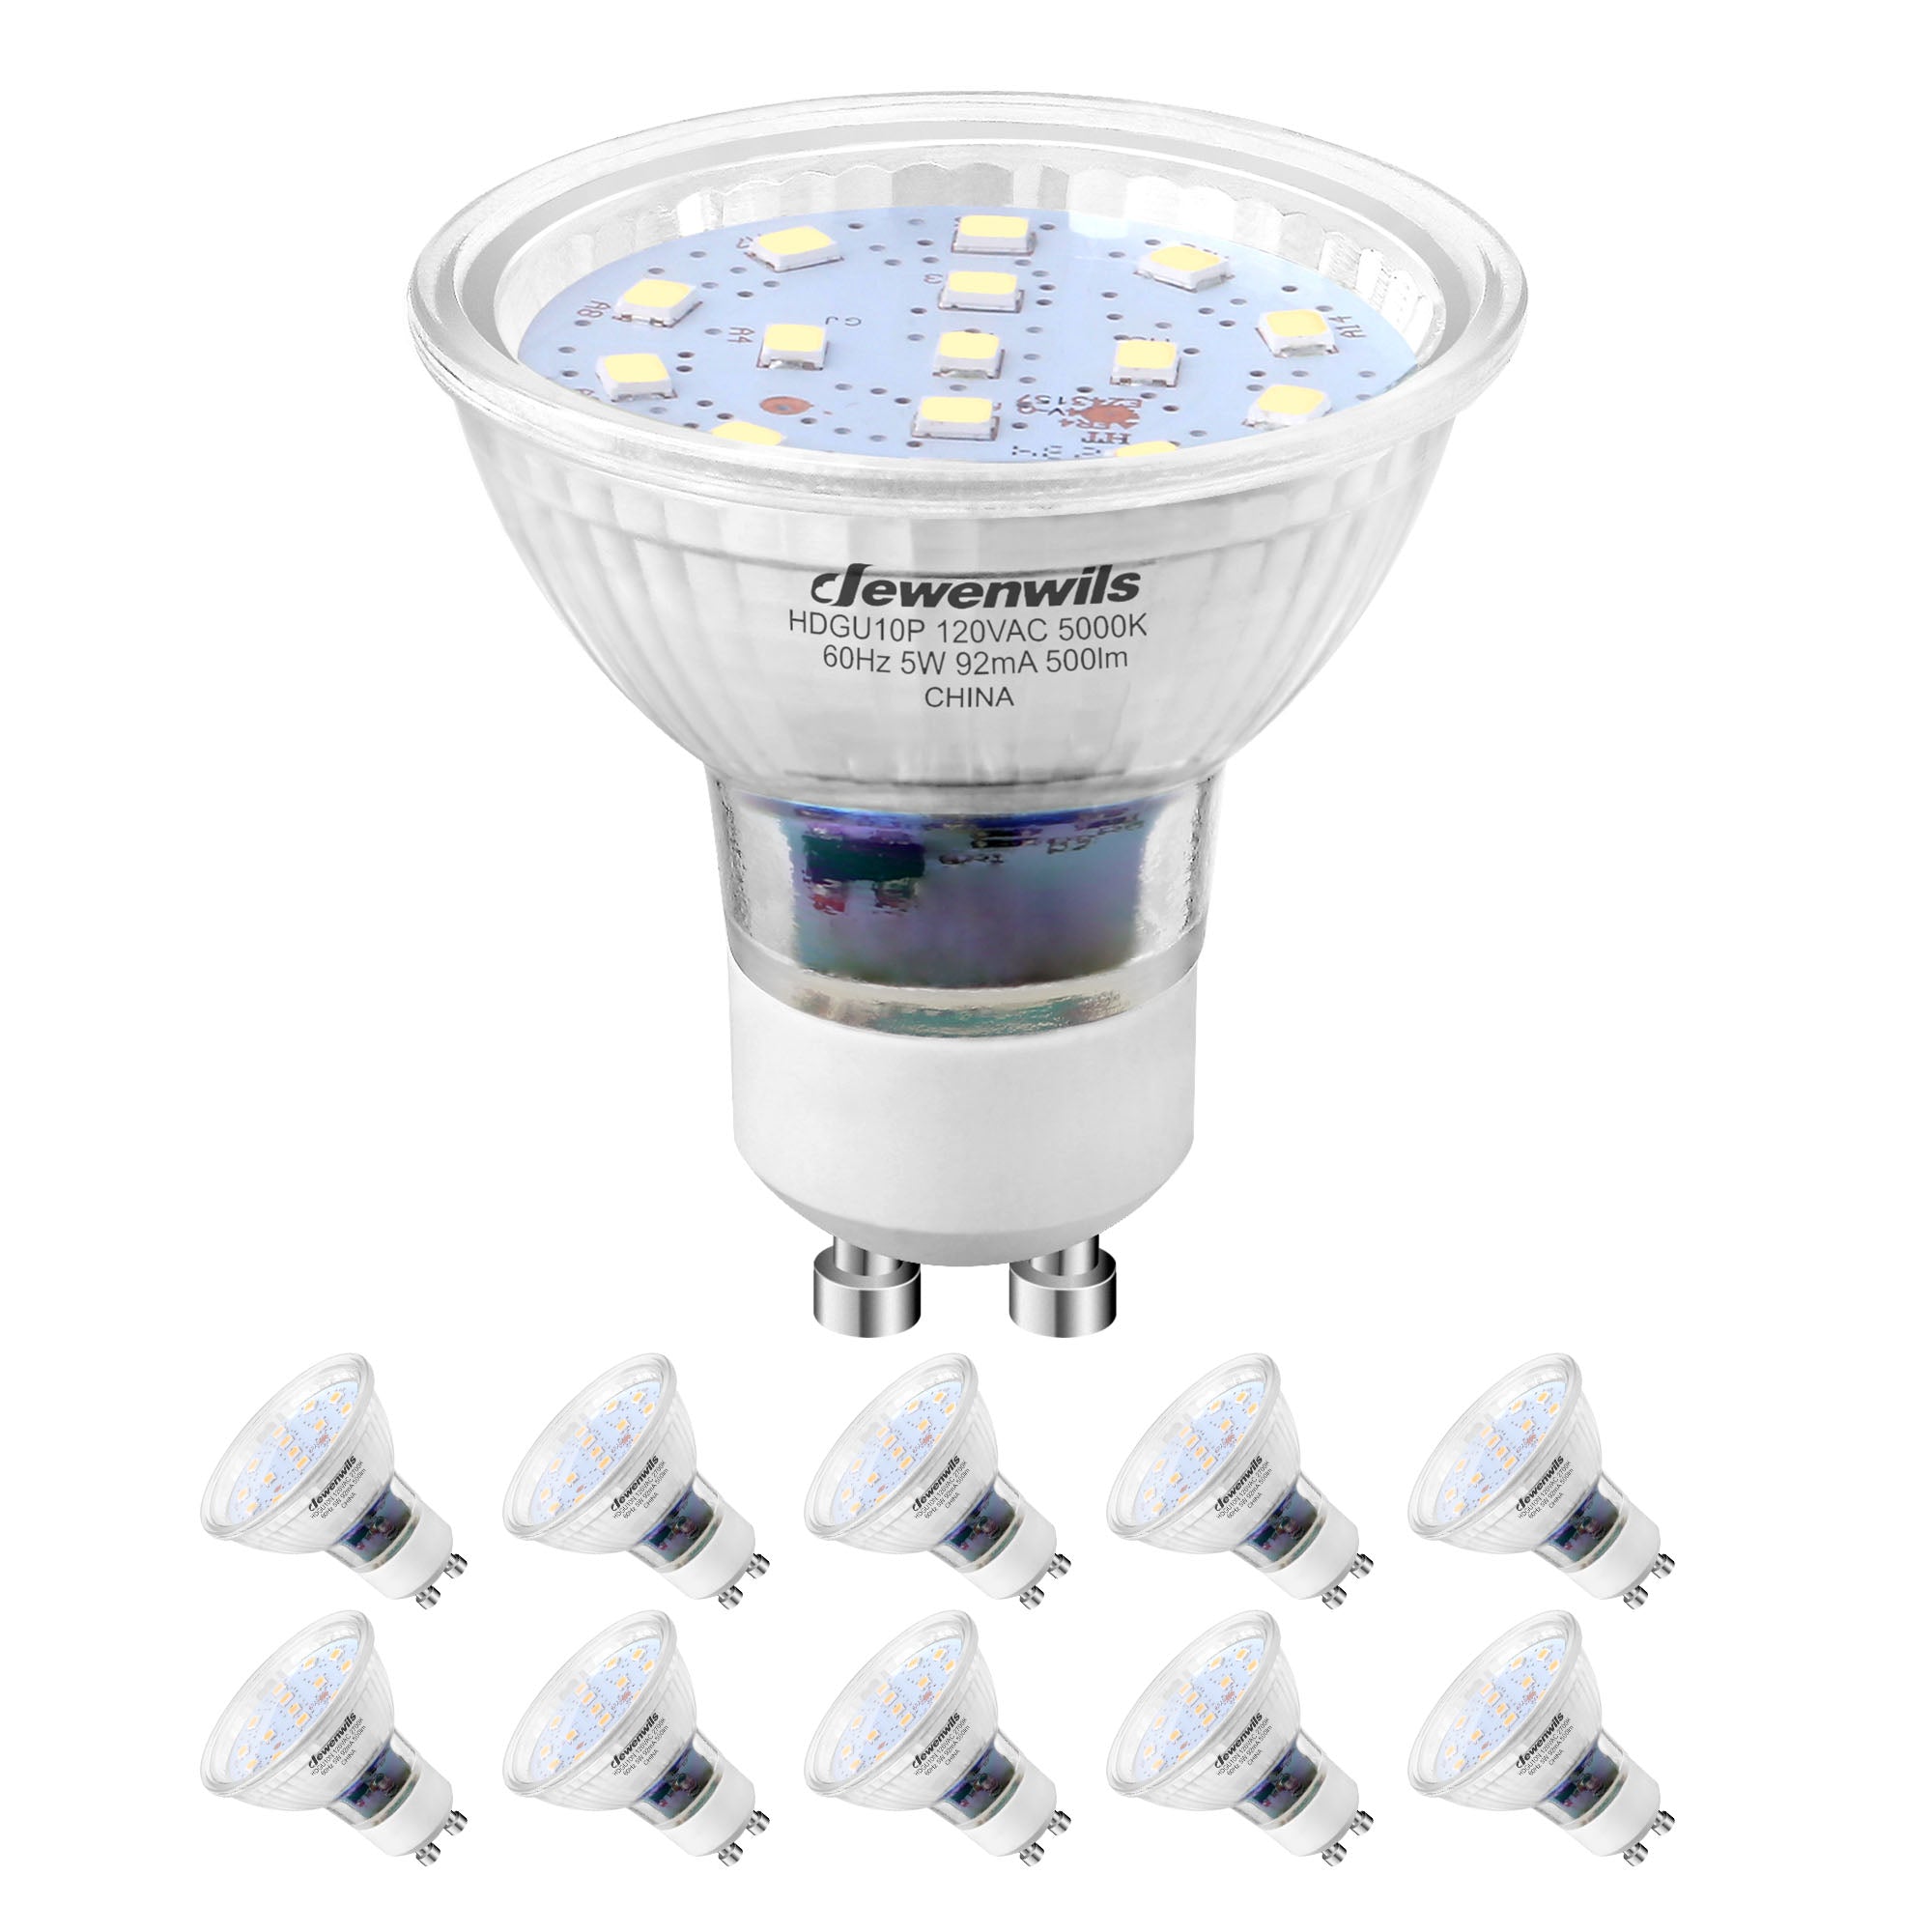 DEWENWILS 10-Pack GU10 LED Bulb Dimmable, 3000K Warm White GU10 Bulb  Replacement for Track Lighting, 500LM, 7W(50W Equivalent) LED Light Bulb  for